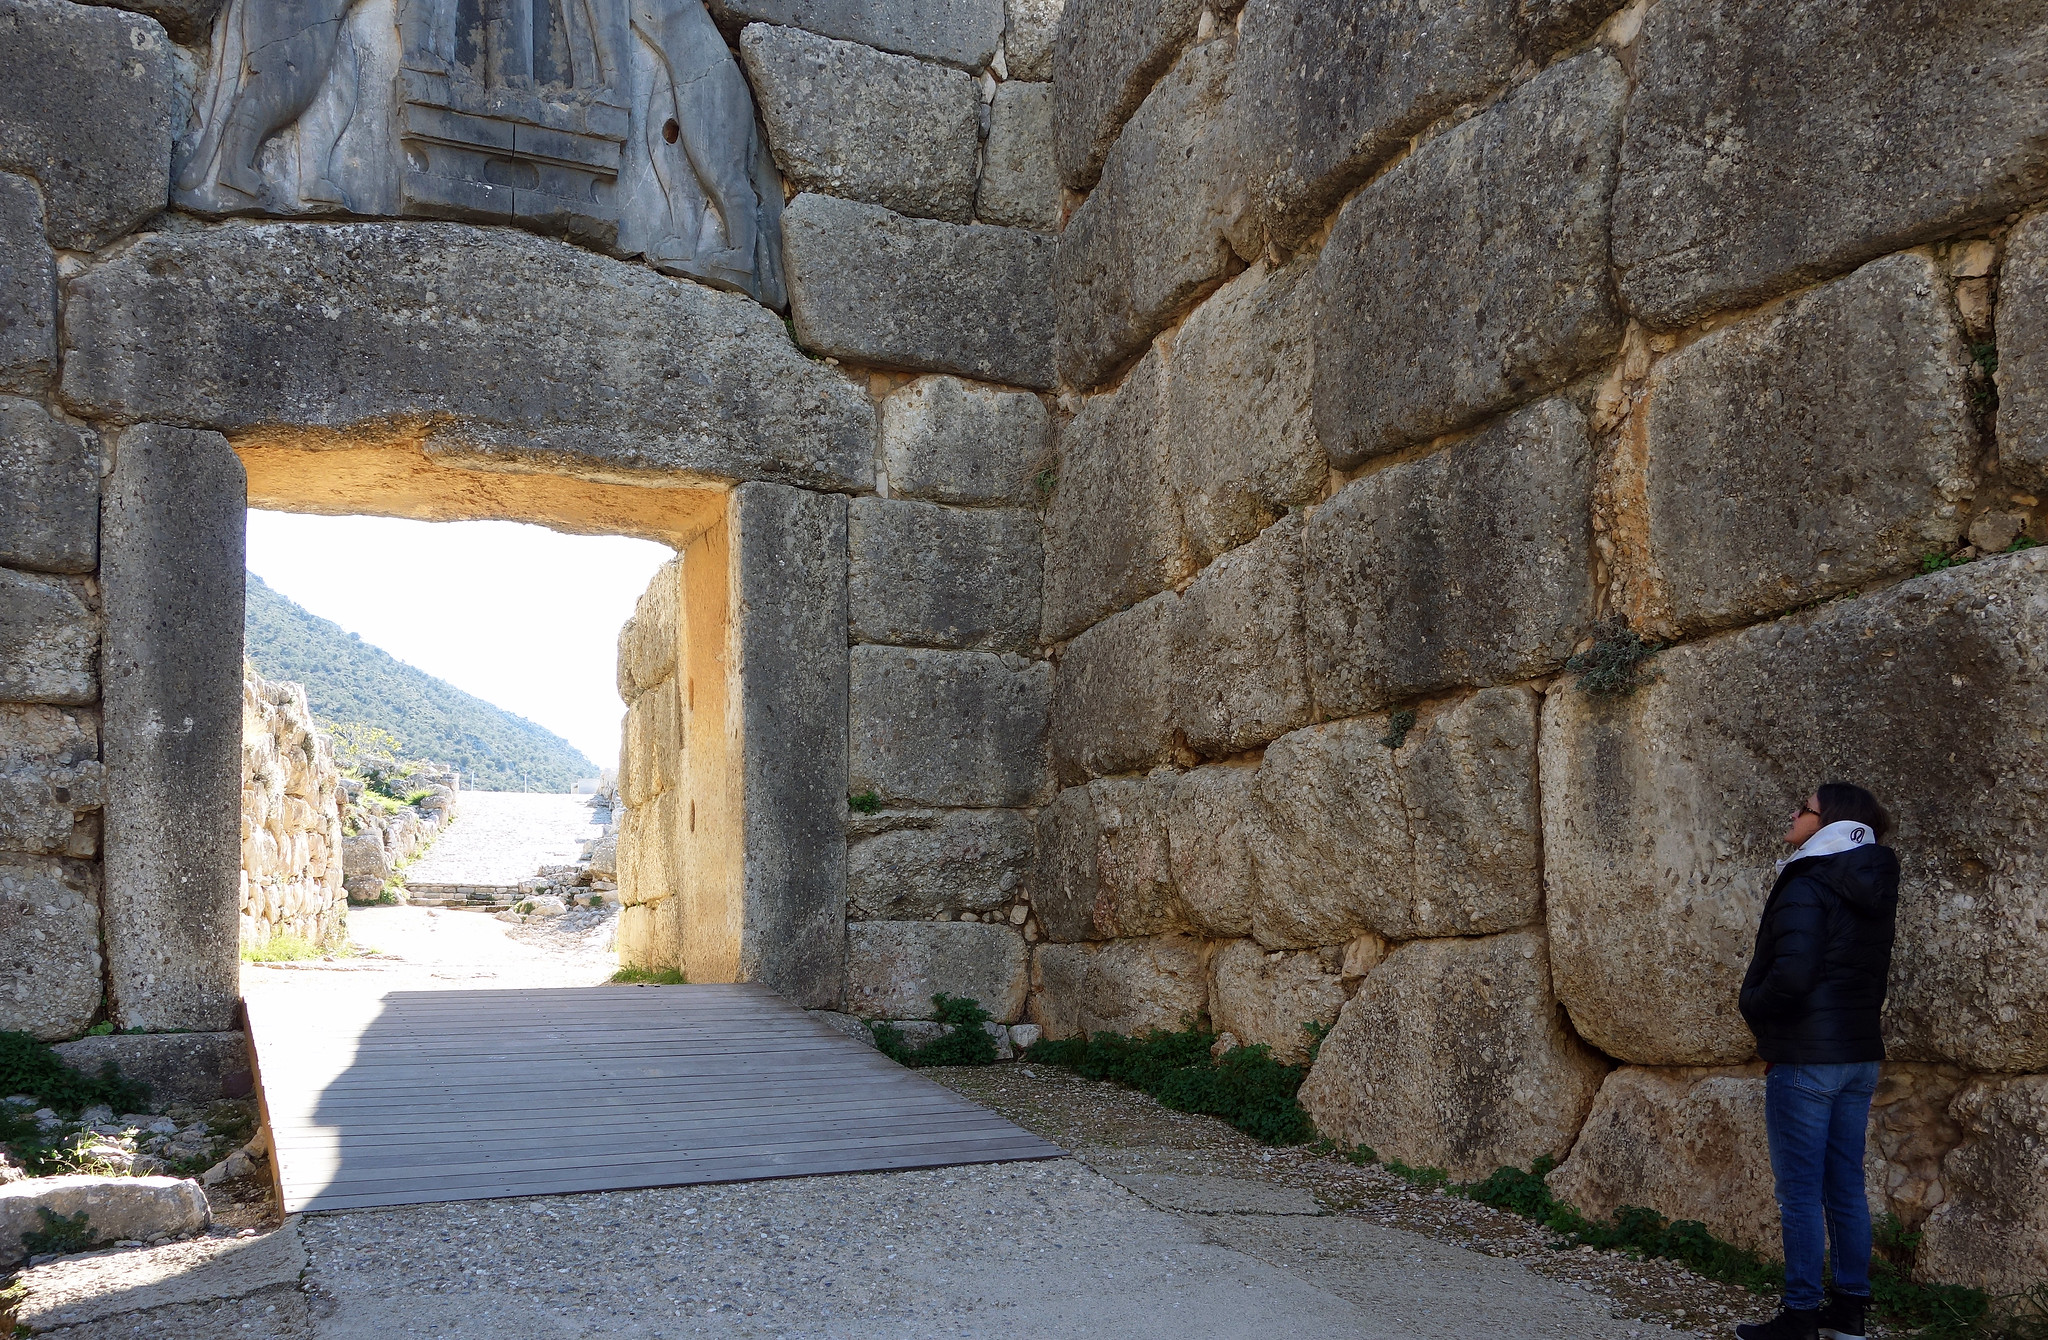 [caption id="attachment_51043" align="aligncenter" width="870"] Looking past the "Palace" to the sea, Mycenae, Greece, c. 1600-1100 B.C.E.[/caption] The ancient citadel (fortified city) at Mycenae (in southern Greece) is located on top of an isolated hill, and provides truly spectacular views of the surrounding area, making it an ideal location for defensive purposes. Mycenaean culture dominated southern Greece, but is perhaps best known for the site of Mycenae itself,  which includes this hilltop citadel (which included a palace), and nearby, different forms of tombs and other structures. Mycenaean culture firmly establishes itself in the late Bronze Age, specifically, around 1600 B.C.E. [caption id="attachment_27867" align="aligncenter" width="1002"] The “Palace” and Grave Circle A, Mycenae, c. 1600–1100 B.C.E.[/caption] At around 1600 B.C.E.—seemingly out of nowhere—the shaft graves at the site of Mycenae are built.  These are two circular walled plots of graves, built some 50 years apart, close to the fortification wall of the citadel.  Archaeologists named these "Grave Circle A" and "Grave Circle B." Grave Circle B is earlier than A (but A was discovered first) and contained some 14 [simple_tooltip content='A shaft grave is a deep rectangular shaft  that leads down to a stone-walled chamber']shaft graves[/simple_tooltip] with 24 burials; Grave Circle A held 6 shaft graves with 19 burials.  These burials contained men, women and children, which recent DNA analysis has shown were related to one another.  [caption id="attachment_31734" align="aligncenter" width="870"] Mask of Agamemnon, from shaft grave V, grave circle A, Mycenae c.1550-1500 B.C.E., gold, 12″ / 35 cm (National Archaeological Museum, Athens)[/caption] More importantly, along with the burials was discovered one of the largest deposits of precious metals, especially gold (including the “Mask of Agamemnon”), ever found in ancient Greece. An even wealthier single shaft grave has been recently discovered near the Mycenaean palace at Pylos. The wealth of the shaft graves is shocking, a huge change from the earlier rather modest remains of Bronze Age mainland Greece and initiates an era of Mycenaean activity and power which stretches across most of the region. The focus sites of this era are Mycenaean palaces which all have several aspects in common: a central megaron or throne room with a large hearth which is adjacent to an open court, commanding views of an agricultural plane, colorful often figural wall painting, and associations with grand burial structures such as tholoi.  These types of sites can be found not only at Mycenae but Tiryns, Iolkos, Orchomenos, Gla, Pylos, Thebes, and on the acropolis at Athens.  Written and visual records [caption id="attachment_51048" align="alignleft" width="255"] Pictorial Style bowl (krater), Mycenaean, c. 1375 B.C.E., 41 cm high (The British Museum)[/caption] We know a lot about the Mycenaeans because they left written records which can be read. They wrote in a script called Linear B (related to the early Minoan Linear A) which recorded an early form of the Classical Greek language. At the sites of Mycenae, Pylos, Tiryns, and Thebes clay tablets inscribed in Linear B have been found describing a theocratic administration, very similar to the one described in the Linear B tablets found at Knossos on Crete. A Wanax (the central figure of authority in Mycenaean society) presided over a complex religious and economic system which, at Pylos, was centered around a perfume oil and textile industry. At that time there was regular contact and exchange between Mycenaean elite and the Pharaonic court in Egypt. Stirrup jars, the uniquely branded vessels of the wildly successful Mycenaean perfume oil trade, are found all over the Mediterranean basin. The design and decoration of Mycenaean pottery riffs off older Minoan styles in almost modernist abstractions and produces the first narrative pottery painting tradition in the ancient Greek world. [caption id="attachment_51046" align="aligncenter" width="430"] Amphoroid krater, Mycenaean, 1375BC-1300 B.C.E., 32 centimetres diameter (The British Museum)[/caption] The motif of armed combat, hand-to-hand (parry and thrust), was perfected by Mycenaean artists, and can be seen beautifully represented in the minute scale of gem engraving. [caption id="attachment_51045" align="aligncenter" width="870"] Two warriors in hand-to-hand combat, Pylos Combat Agate, discovered in a tomb near the Palace of Nestor in Pylos, c. 1450 B.C.E., 1.5 inches wide[/caption] At the same time, Mycenaean architects and engineers embraced a massive scale with huge hydraulic projects, far flung road works, and defensive walls so gigantic they never succumb to burial, remaining largely intact and providing the inspiration for mythological explication until the modern era.   Around 1200 B.C.E. nearly all major Mycenaean sites experienced massive destructions the cause of which is unclear. Many sites were quickly reinhabited but the elite areas, such as the spaces where it is believed the Wanax ruled, were not rebuilt. For the next 50 to 75 years, pottery production and even wall painting continues but becomes less fine and increasingly regional, eventually ceasing all together. Burial practice changes as well, from shaft graves to small individual cist graves containing cremated remains. By 1050 B.C.E., at the end of the Bronze Age, the Greek world, the Cycladic islands, Crete, and the Mainland, has only memories left of the once wealthy and far reaching polities which had ruled for nearly a millennium, an era soon to be beautifully enshrined in the oral epic tradition of Homer. 